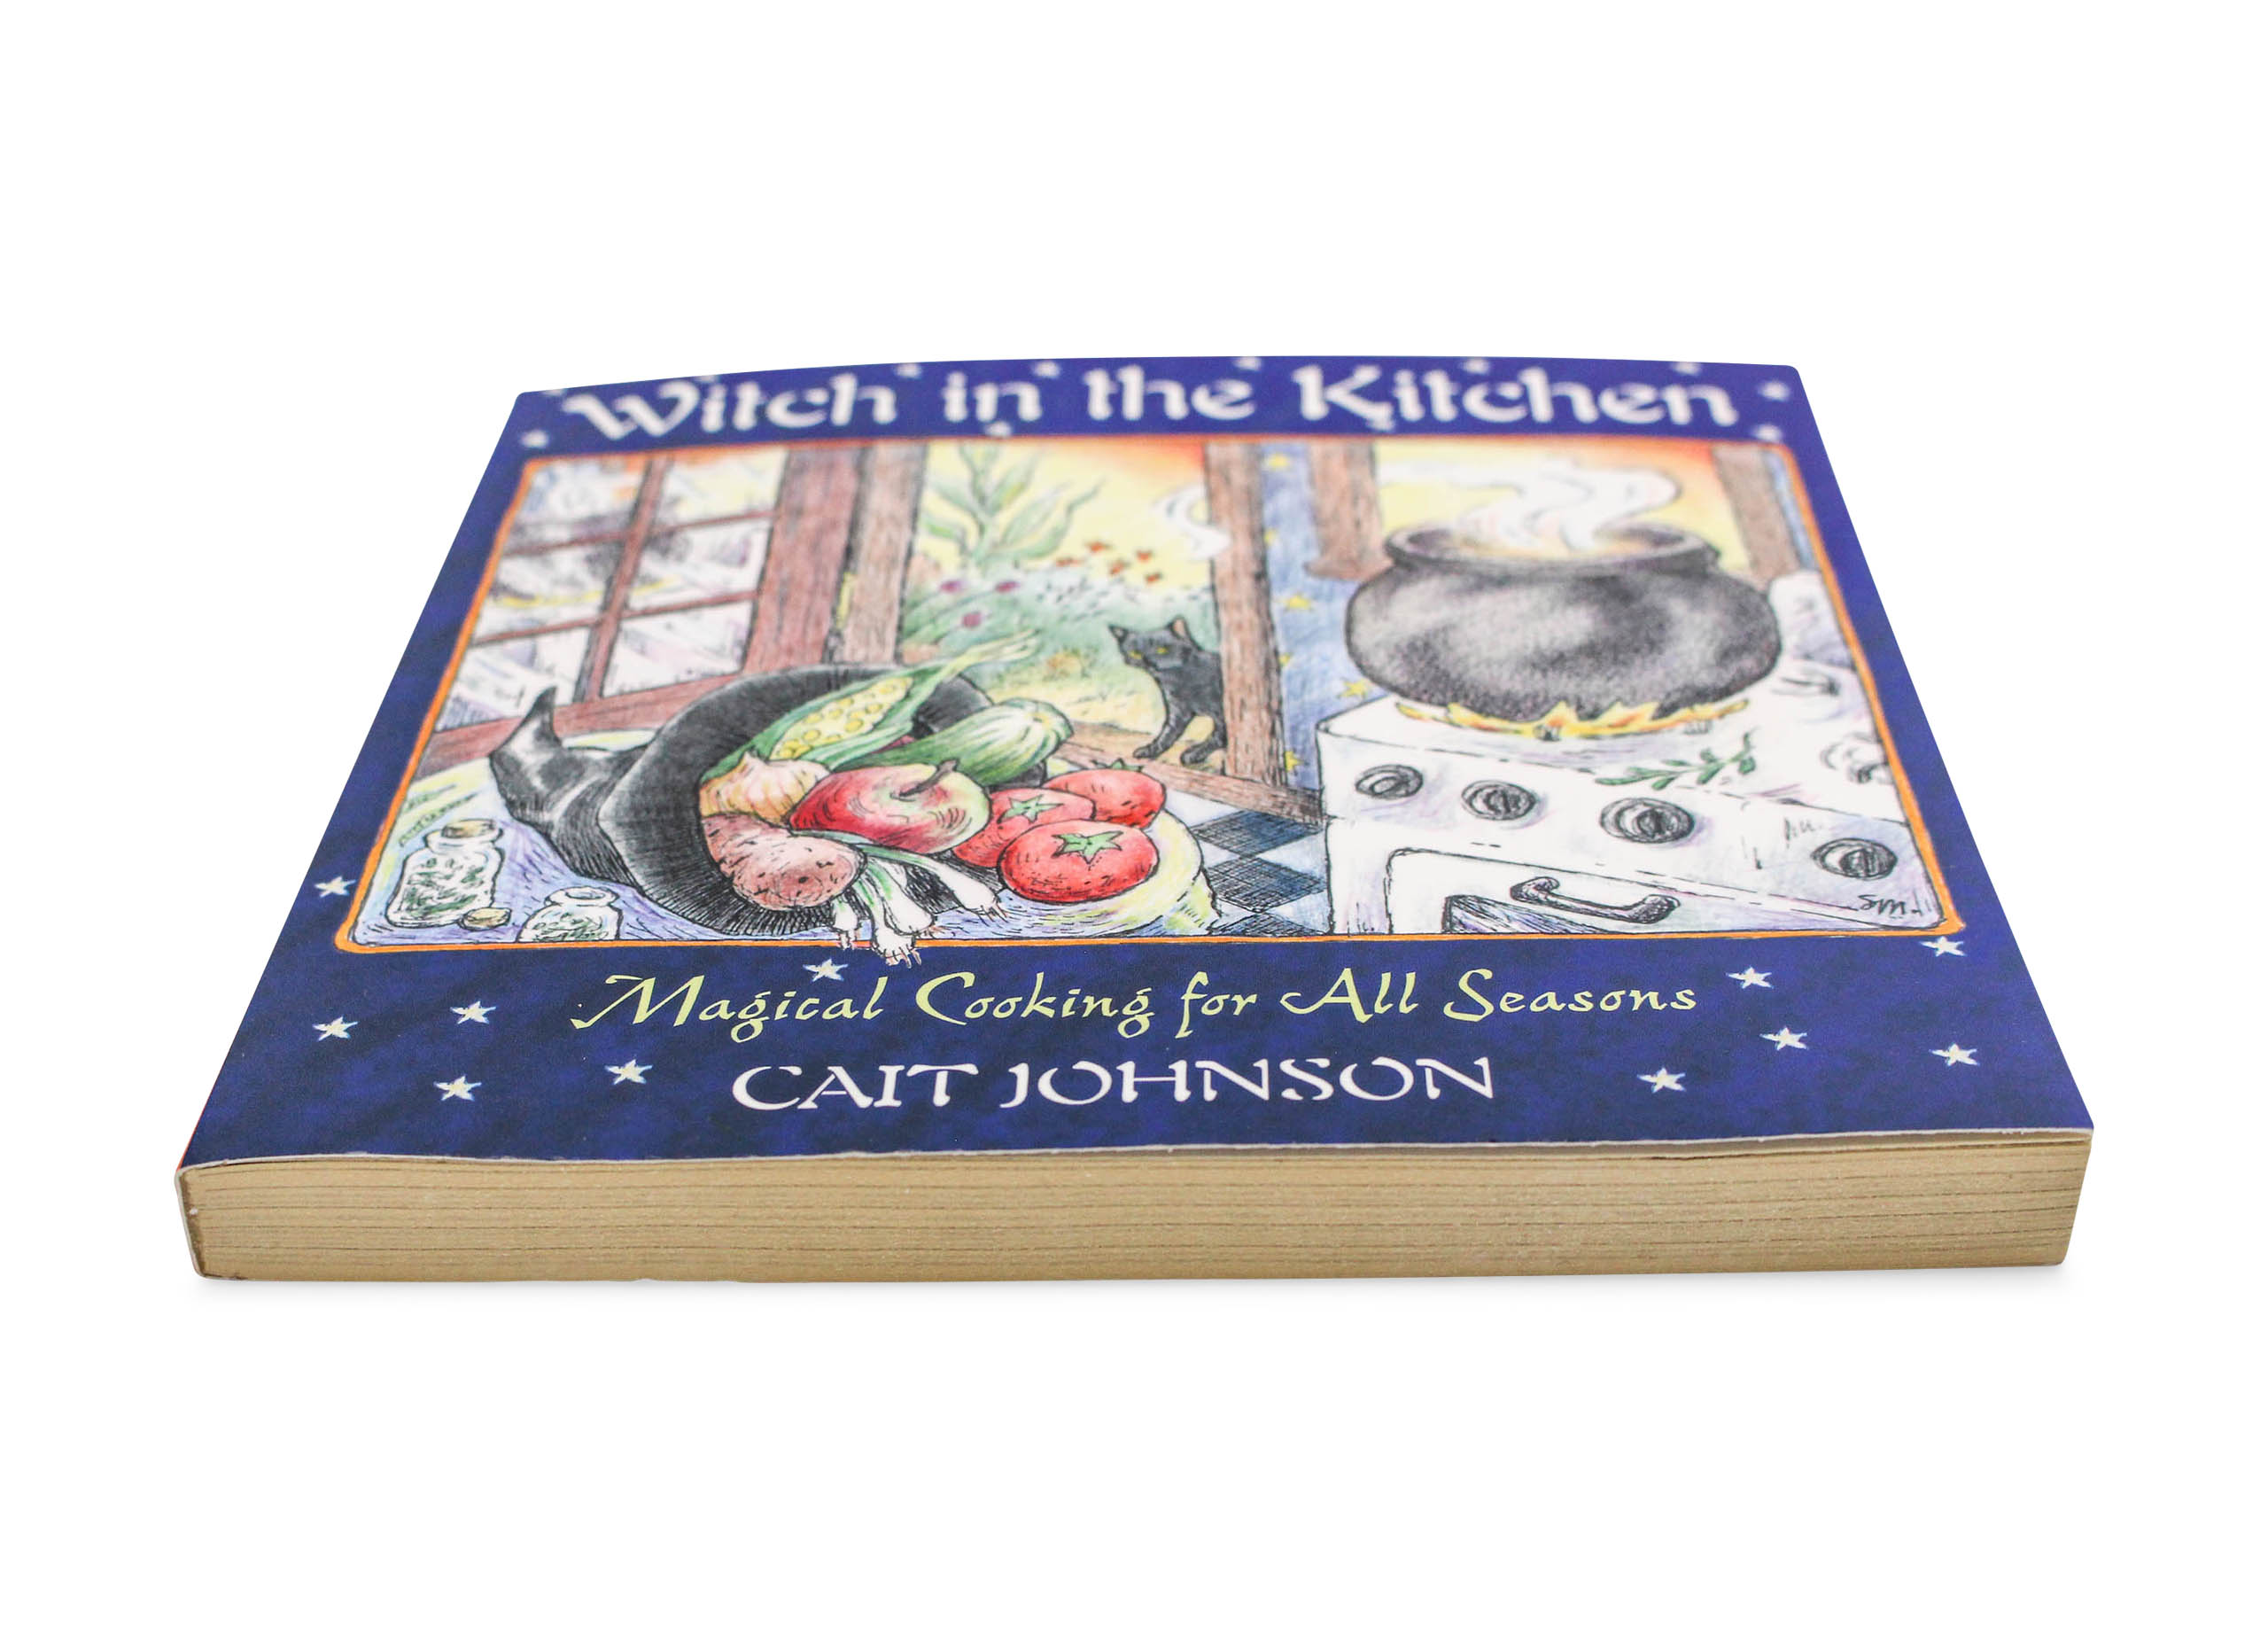 Witch in the Kitchen Book - Crystal Dreams